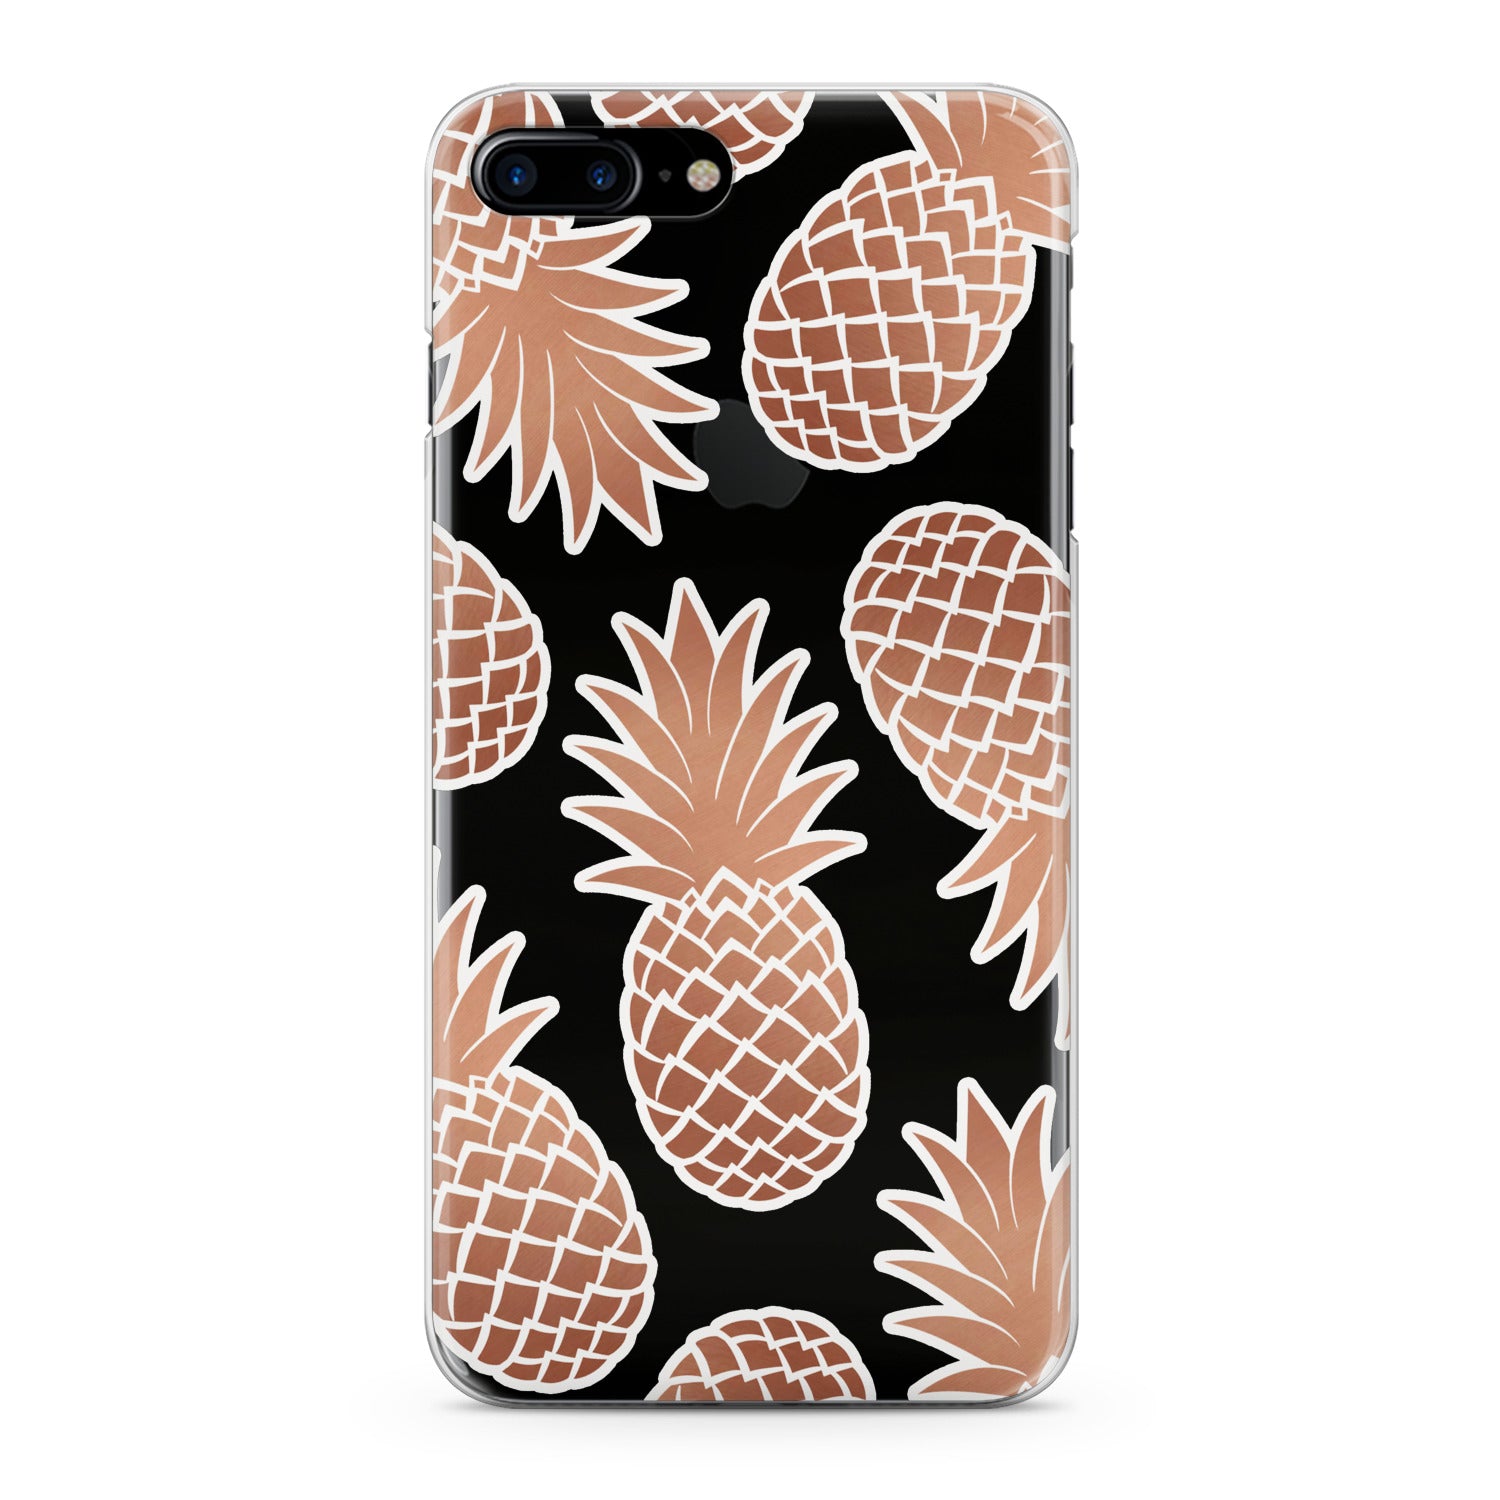 Lex Altern Graphic Pineapple Phone Case for your iPhone & Android phone.